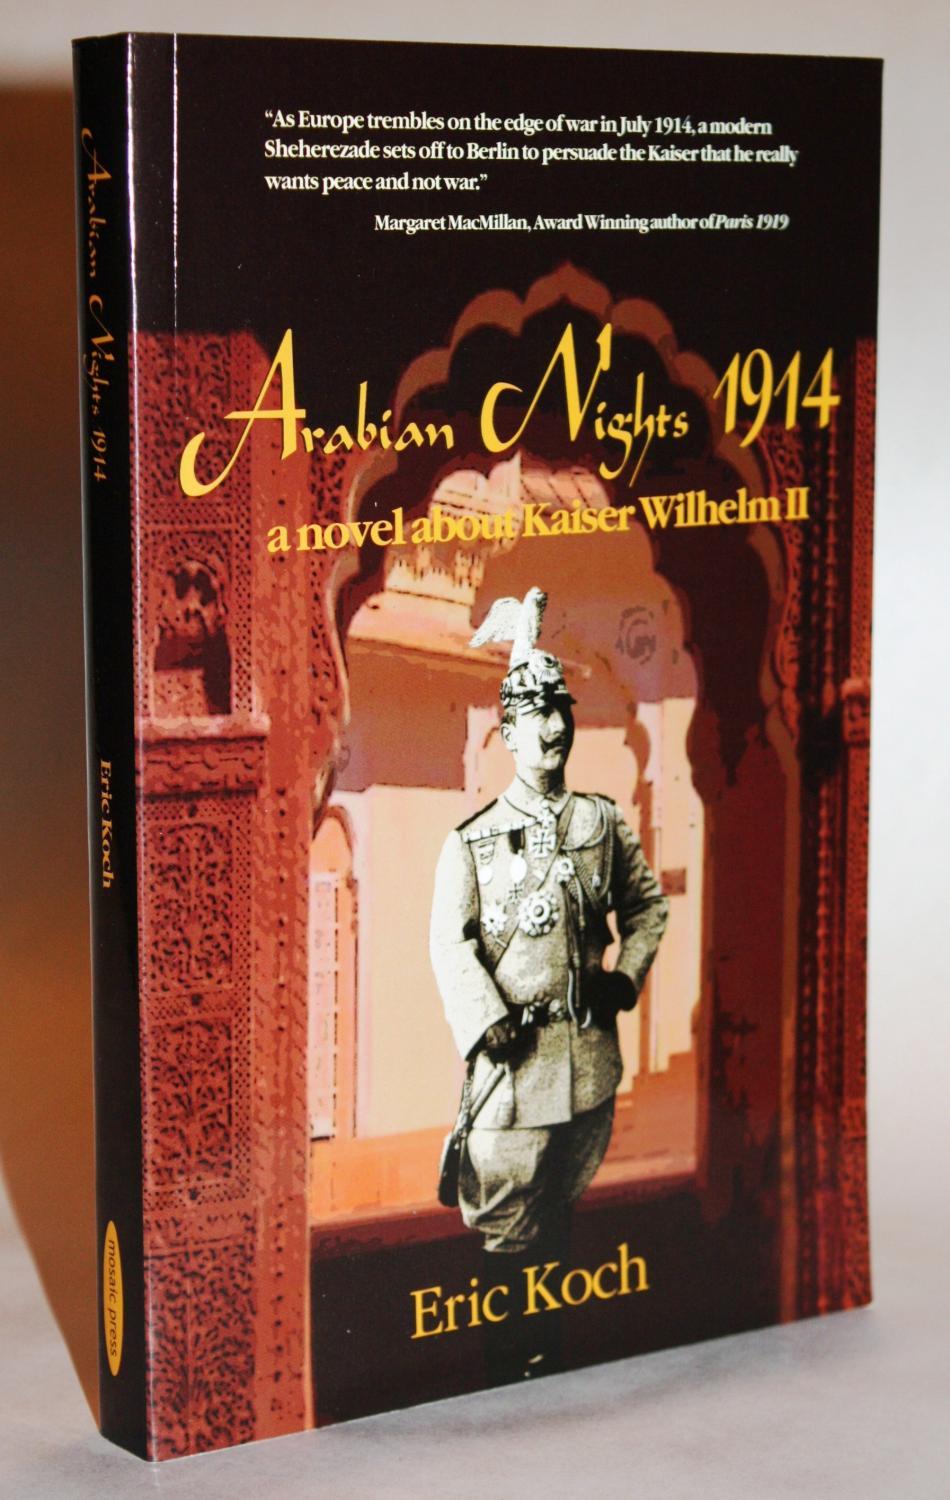 ARABIAN NIGHTS 1914 - a Novel about Kaiser Wilhelm II {SIGNED & DATED by the Author} - Eric Koch